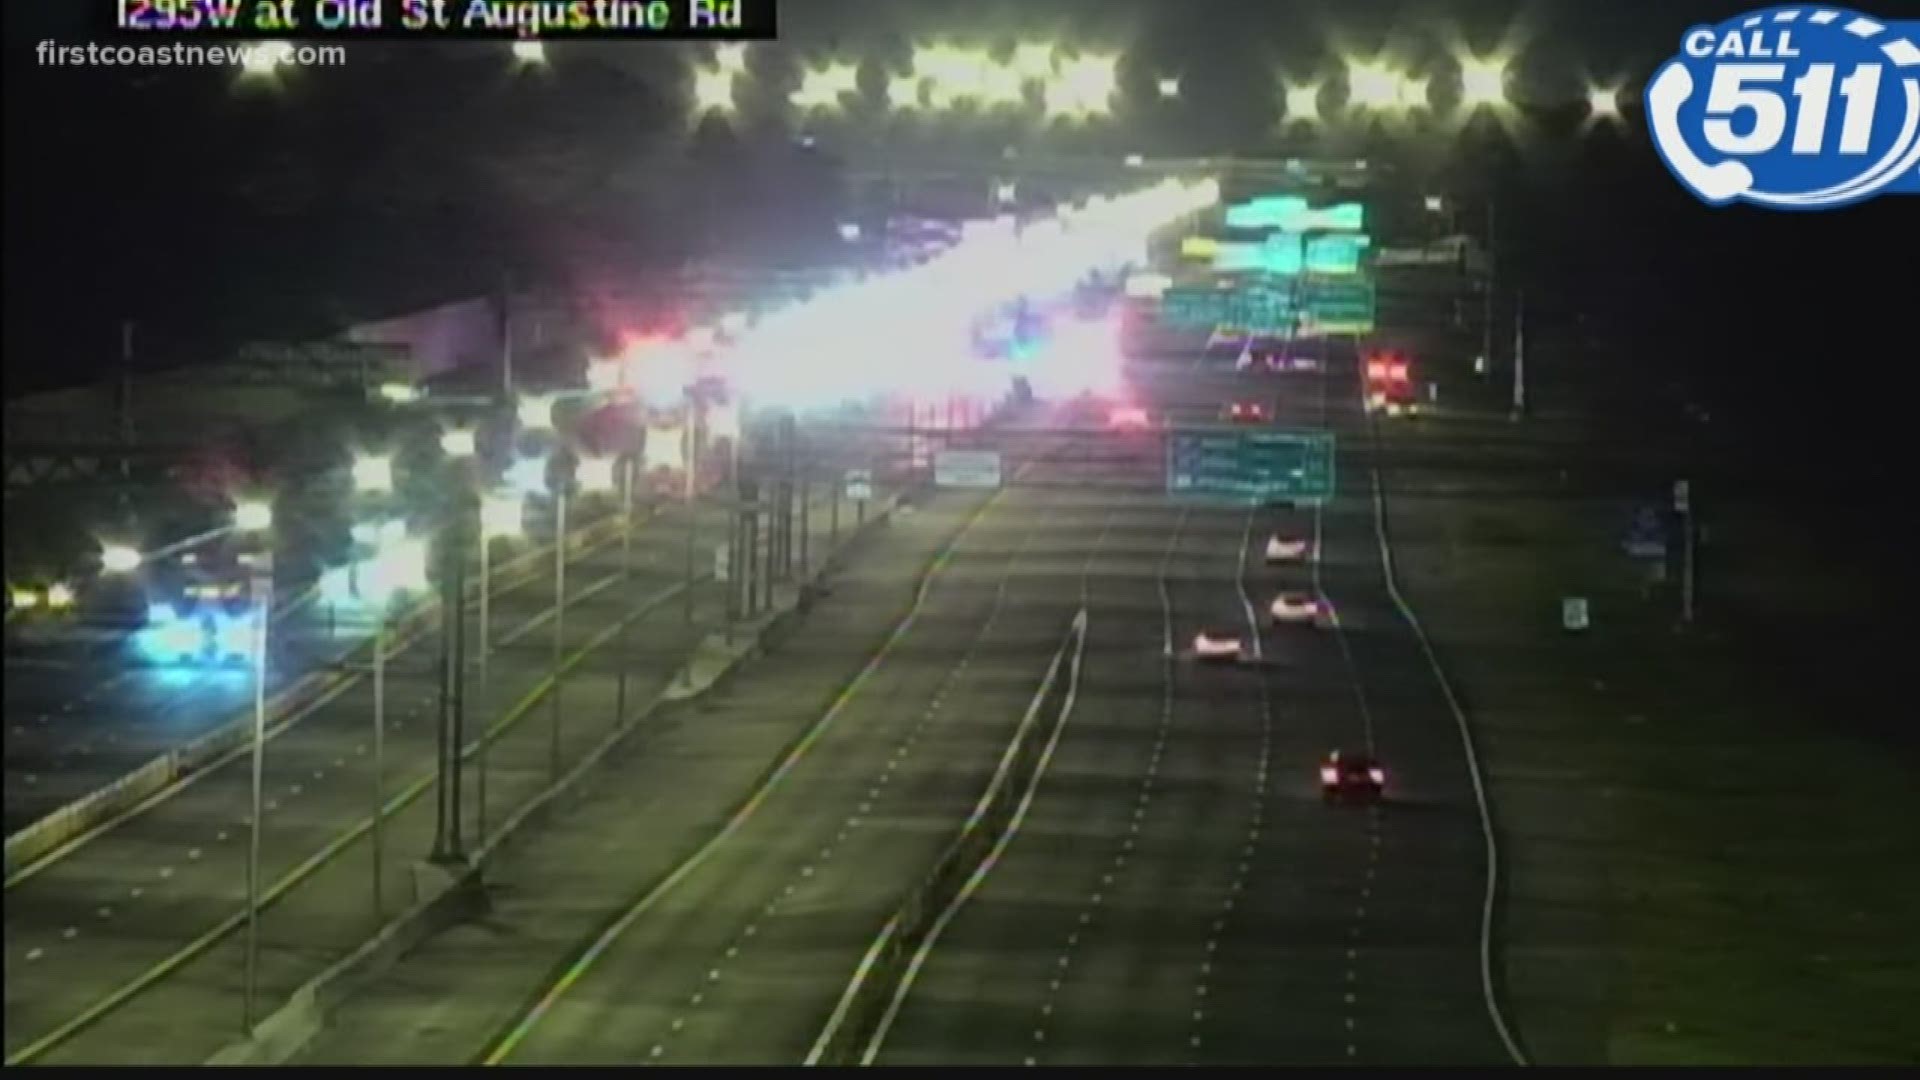 First responders are on the scene of a crash with critical injuries on westbound I-295 near Old. St. Augustine Road.